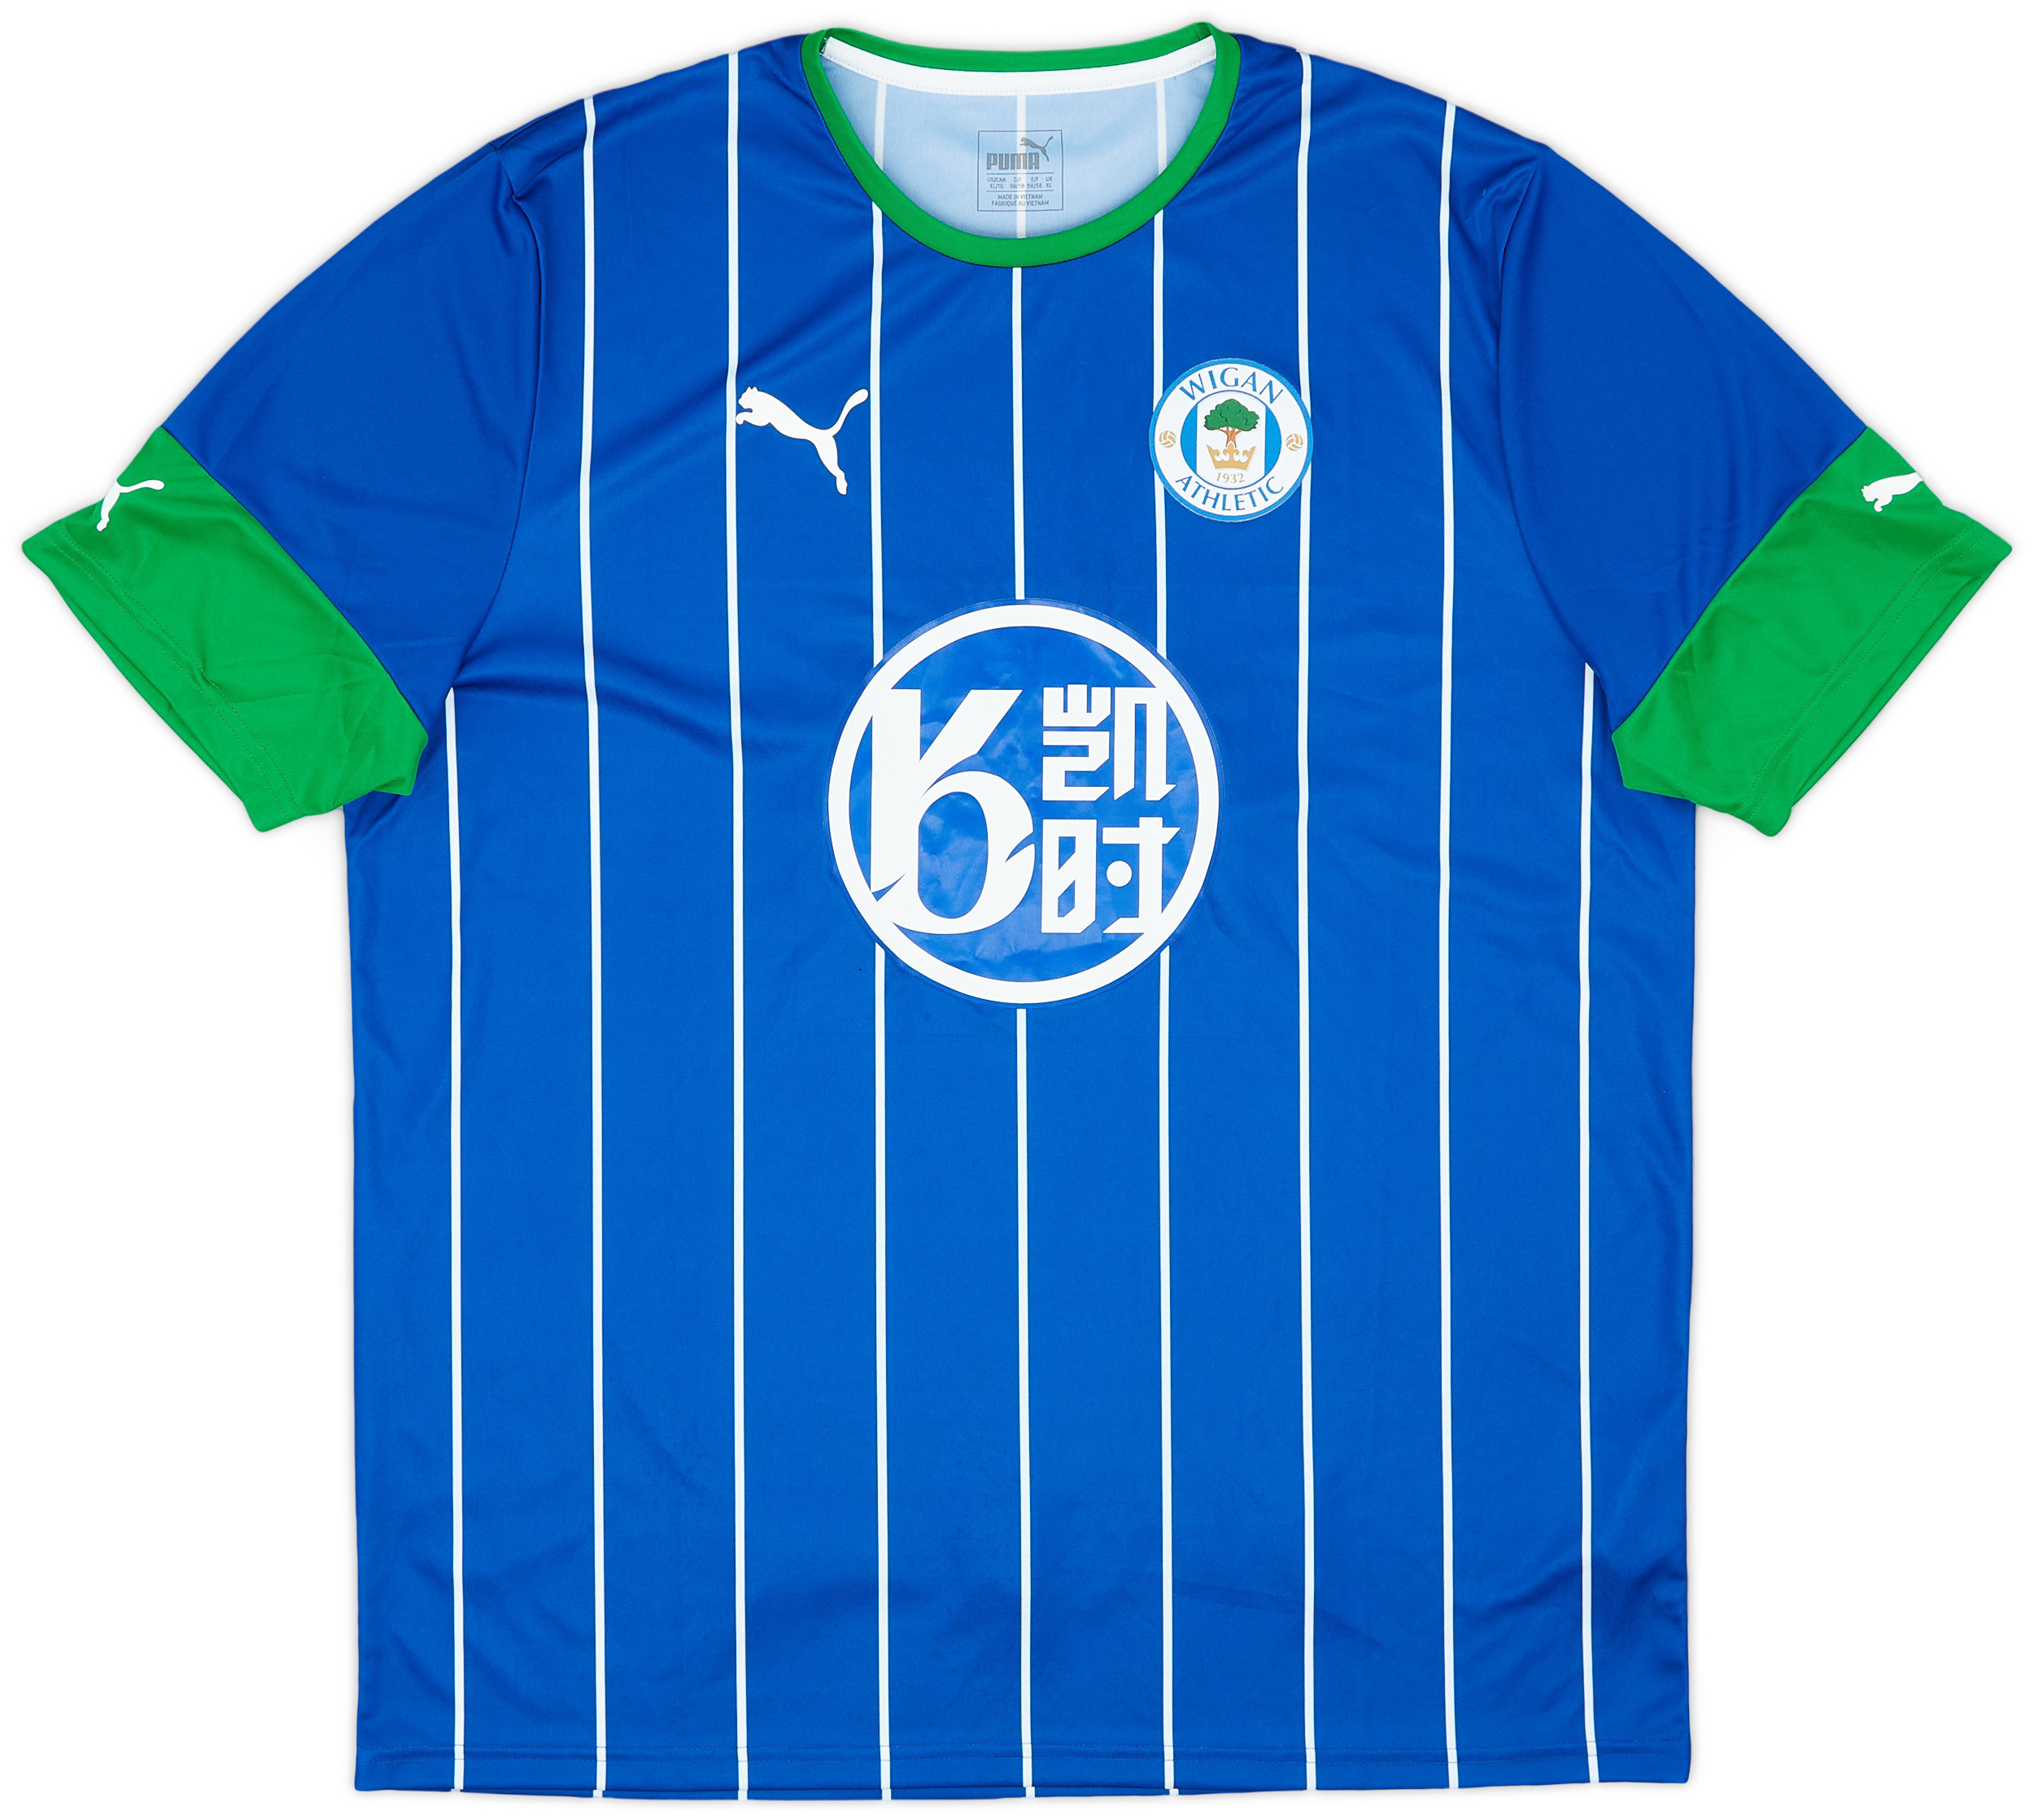 2019-20 Wigan Athletic Home Shirt - 8/10 - ()